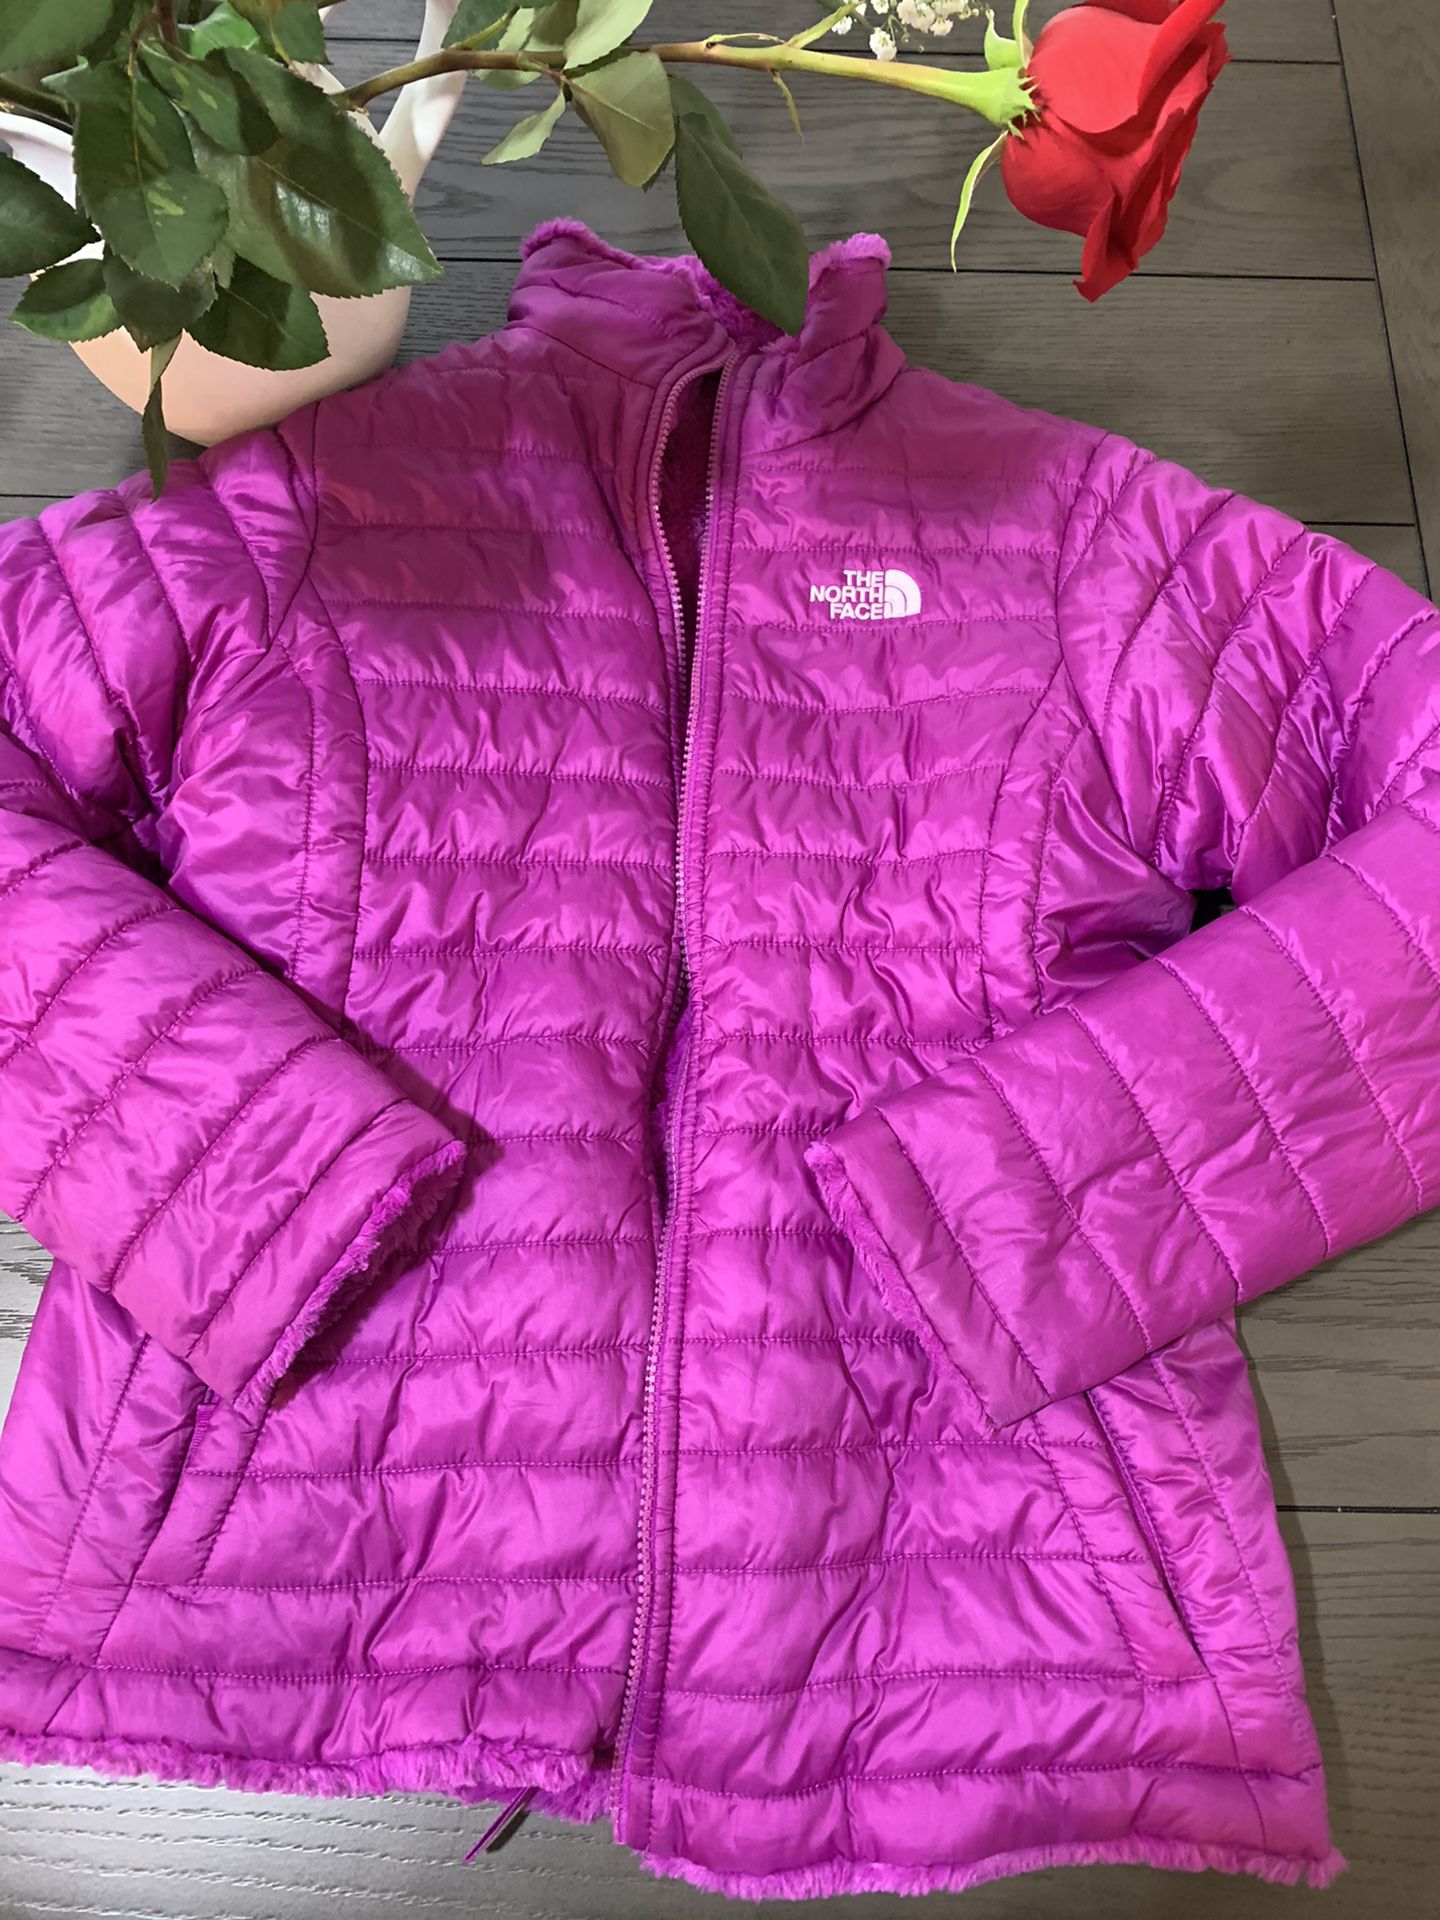 north face jacket like new sz14 kids or small womens